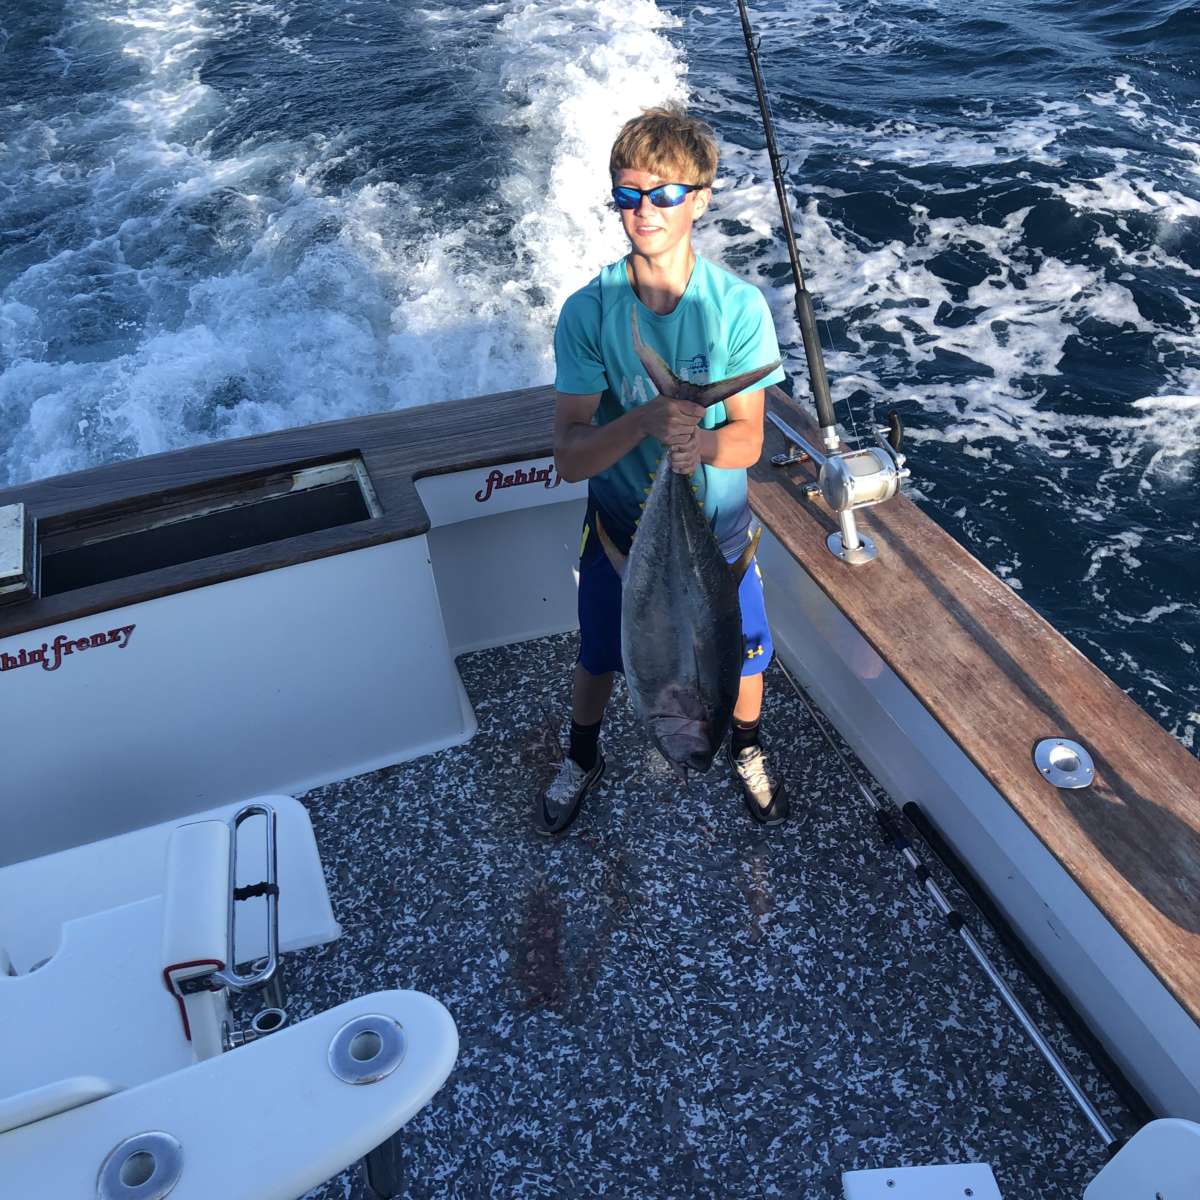 Fishing Report - Fishin Frenzy - Report on the latest OBX charter fishing